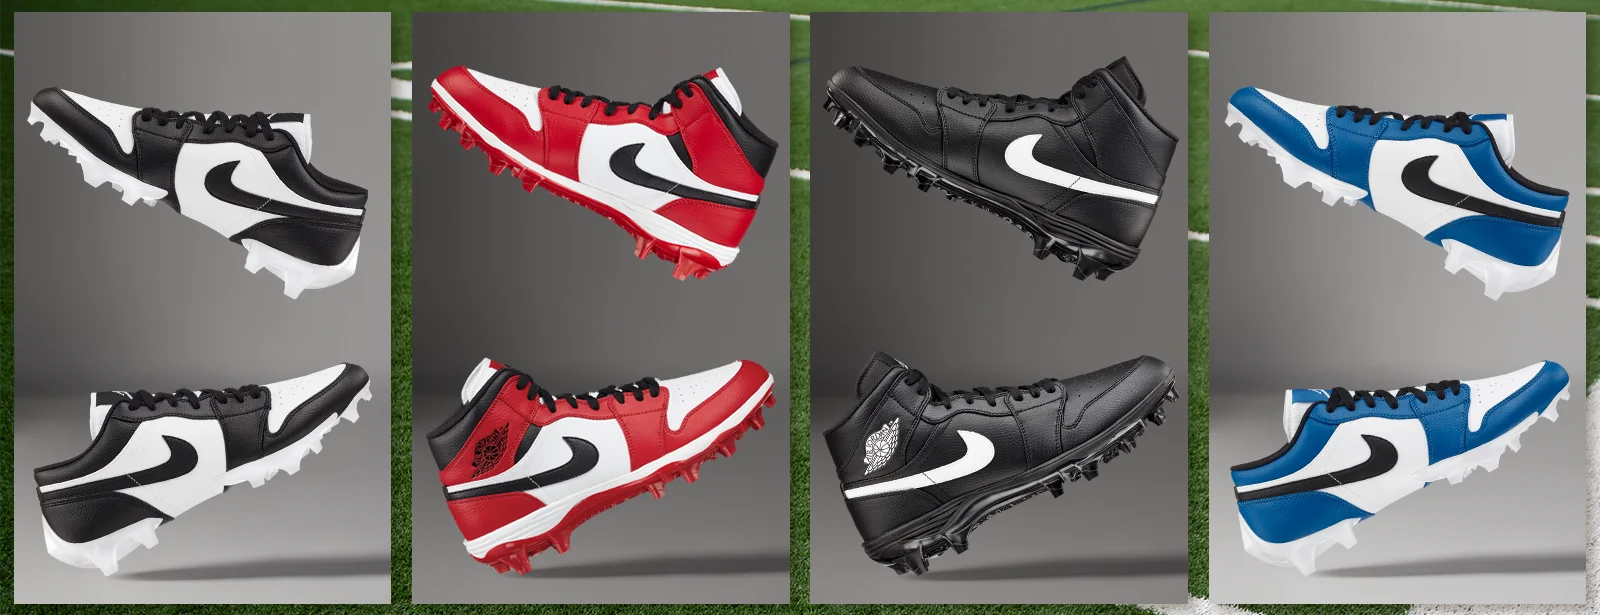 Jordan 1 Mid and Low Football Cleats.